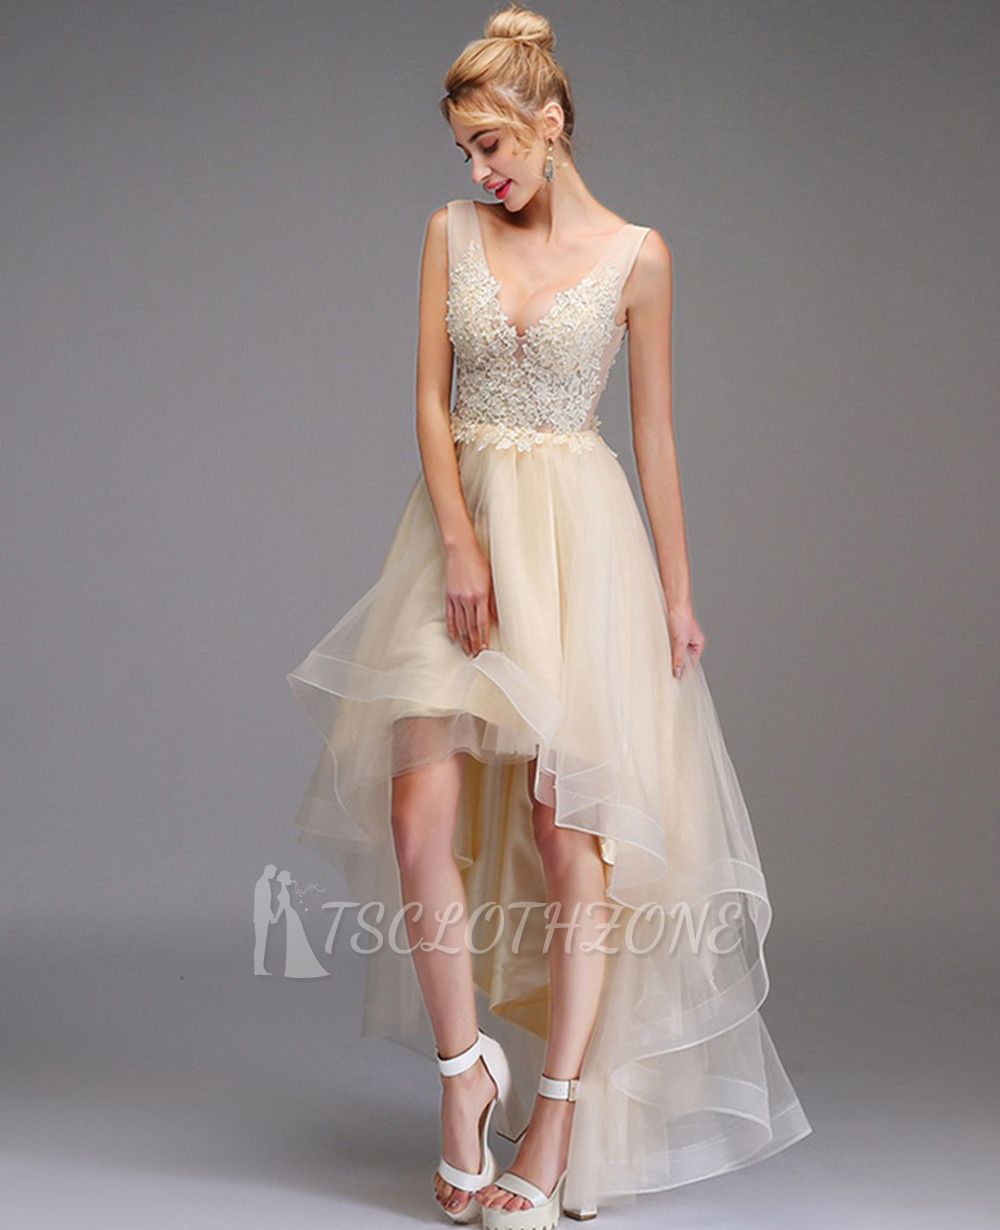 High-low Prom Dress A-line Sleeveless Double V-neck Princess Party Gown Lace Tulle Backless Dress